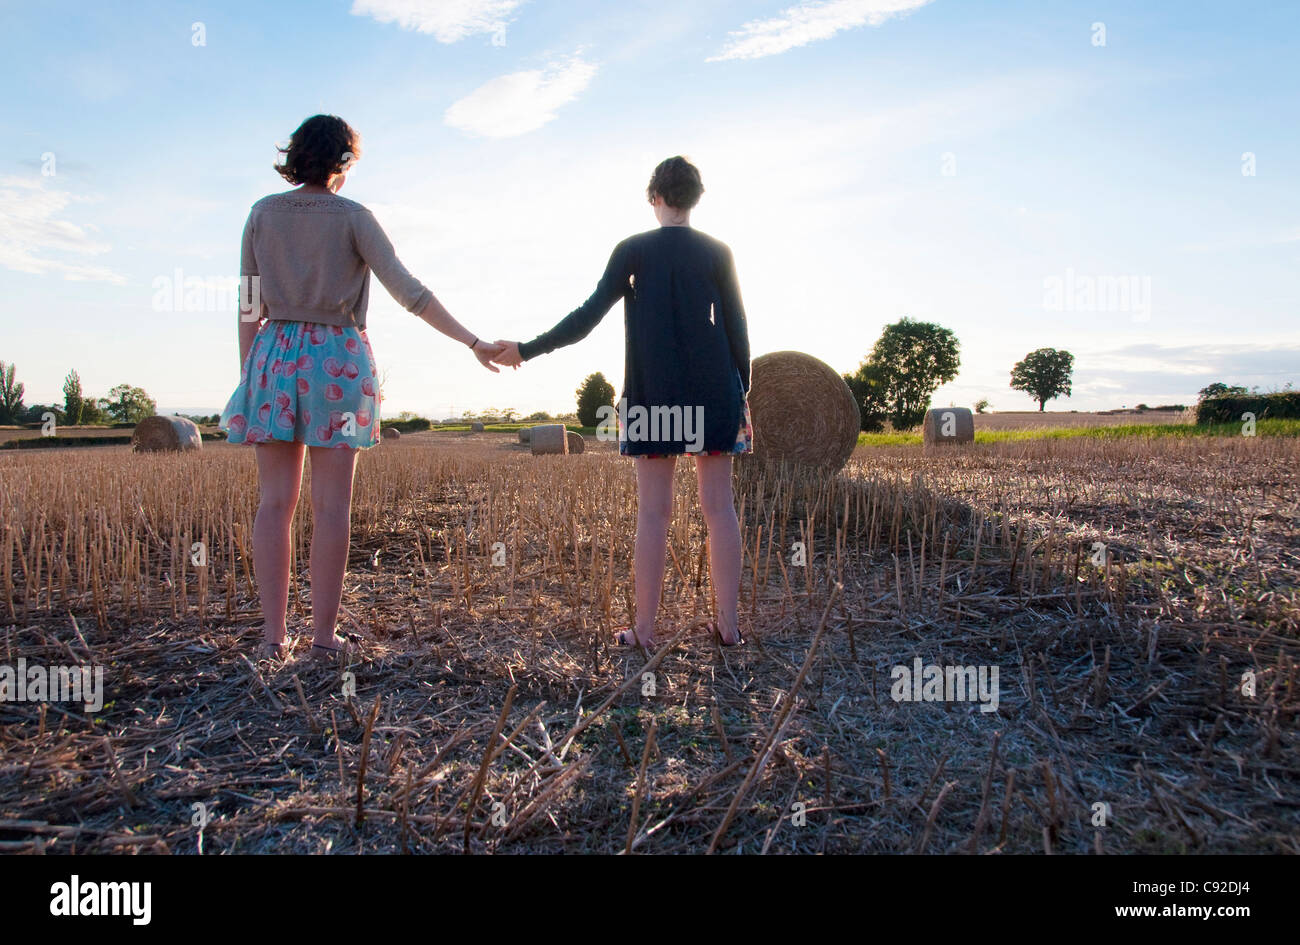 Girls holding hands in hay field Banque D'Images